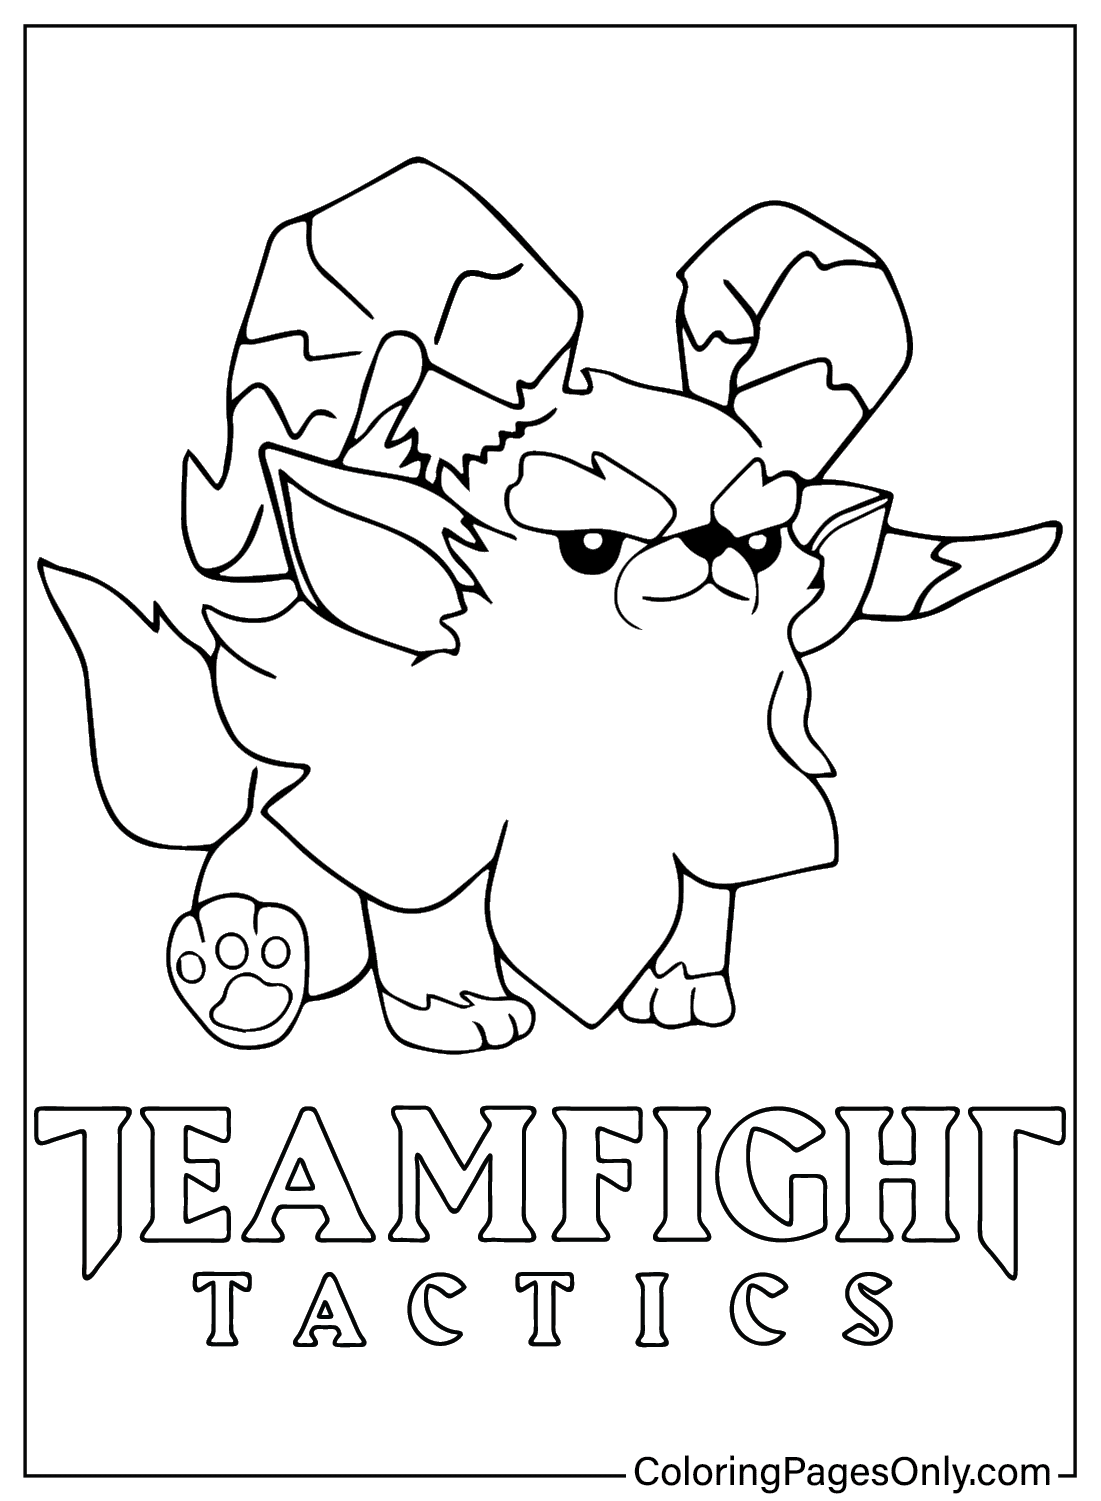 Furyhorn from Teamfight Tactics Coloring Page from Teamfight Tactics